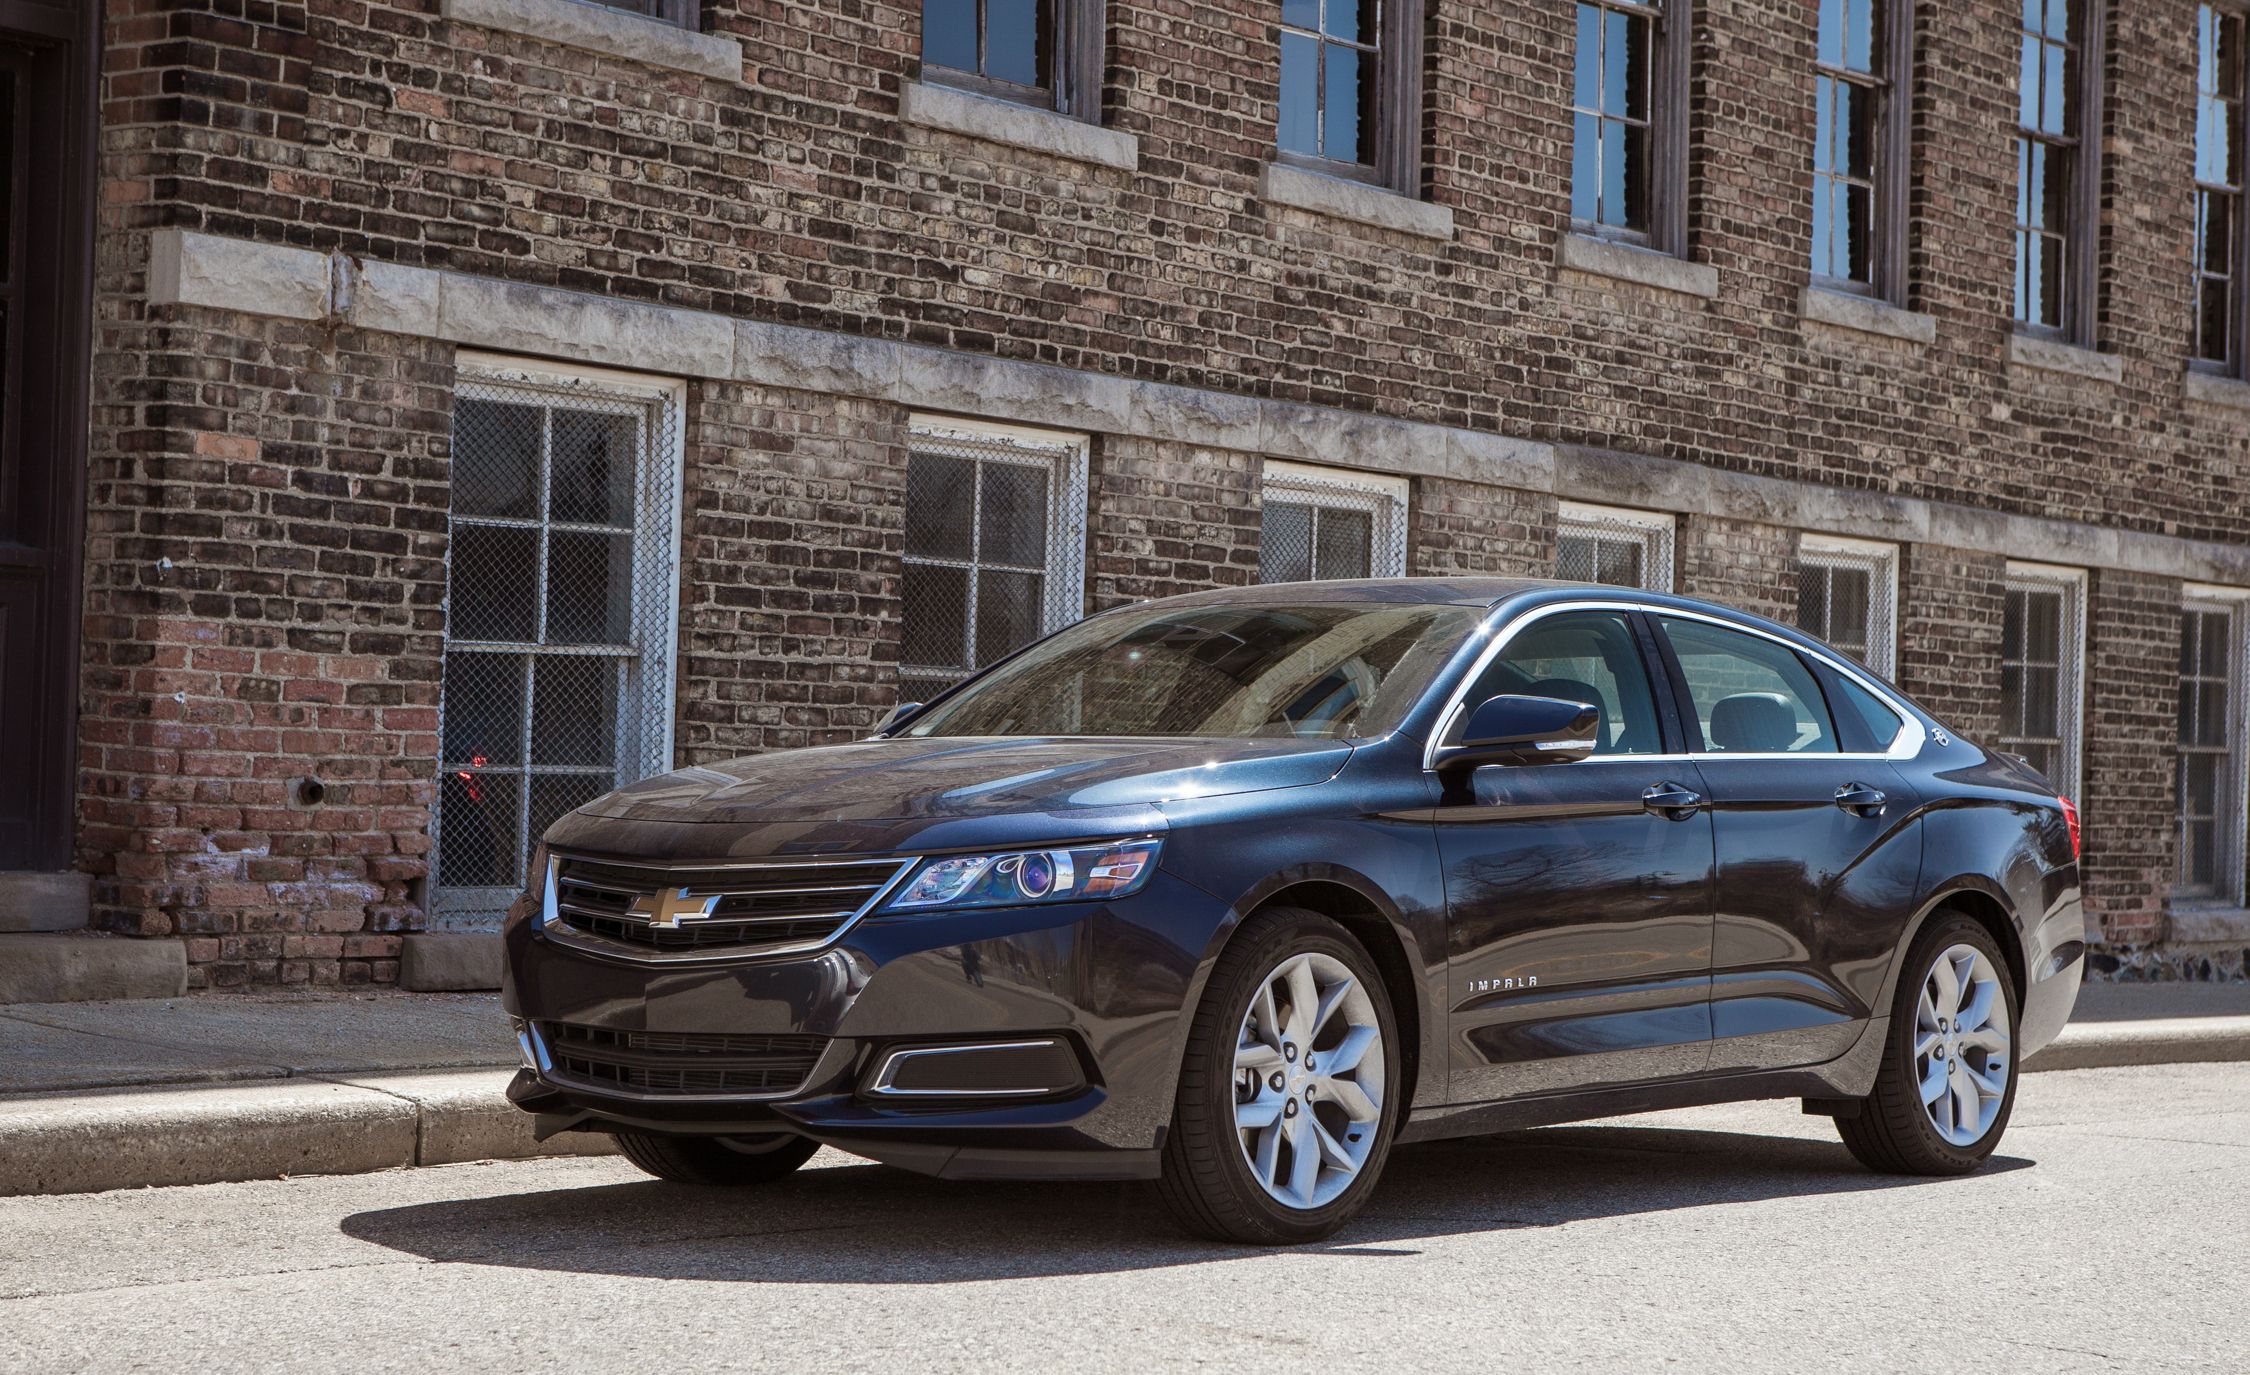 2019 Chevrolet Impala Review, Pricing, and Specs